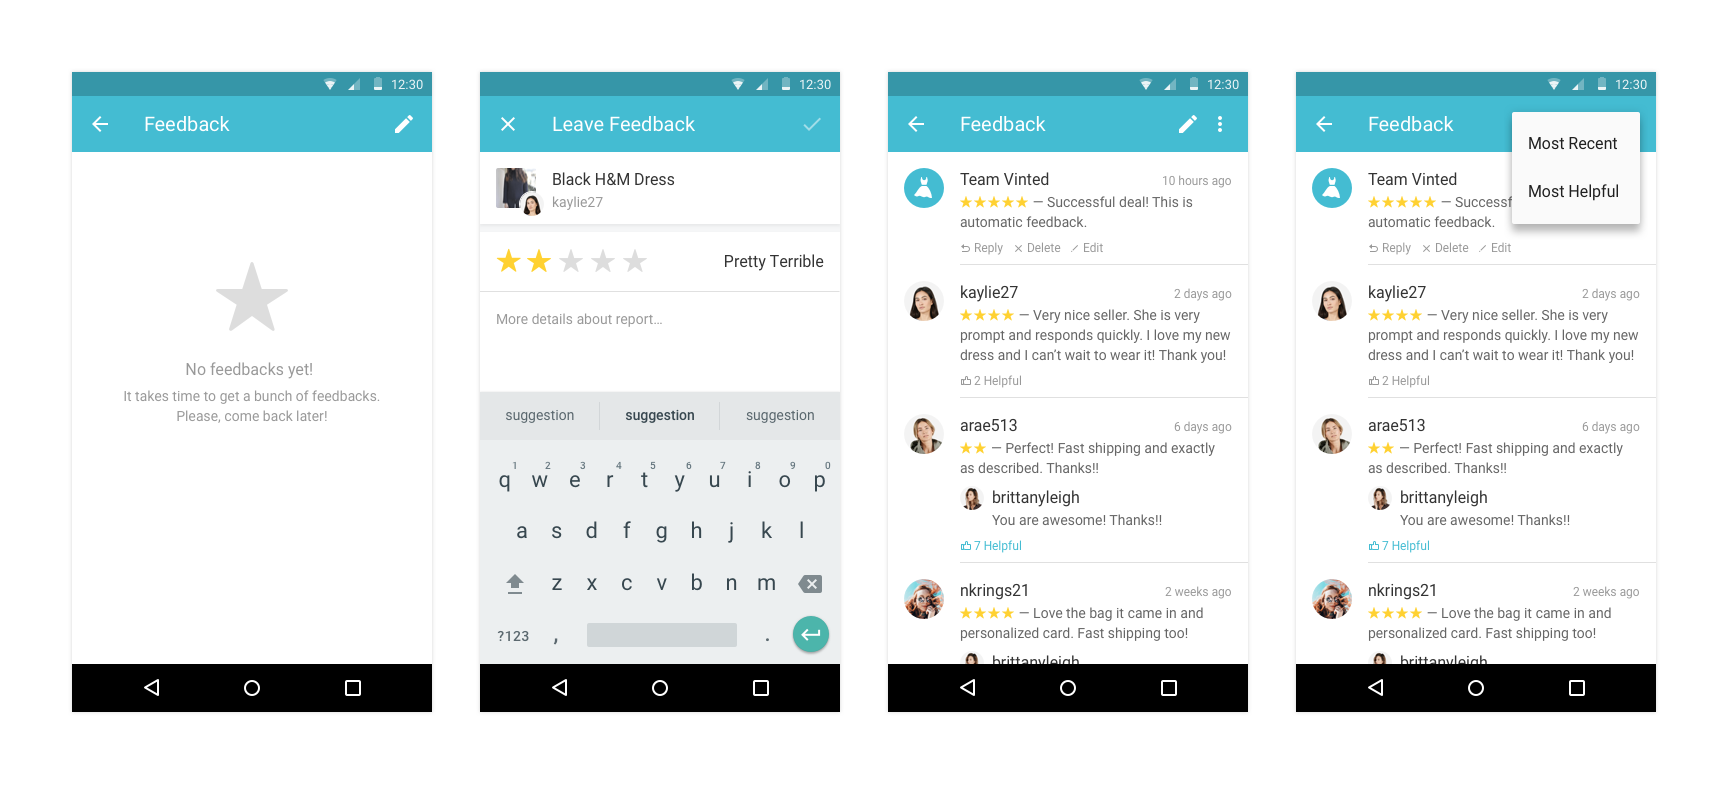 The updated flow for feedback leaving on Android.